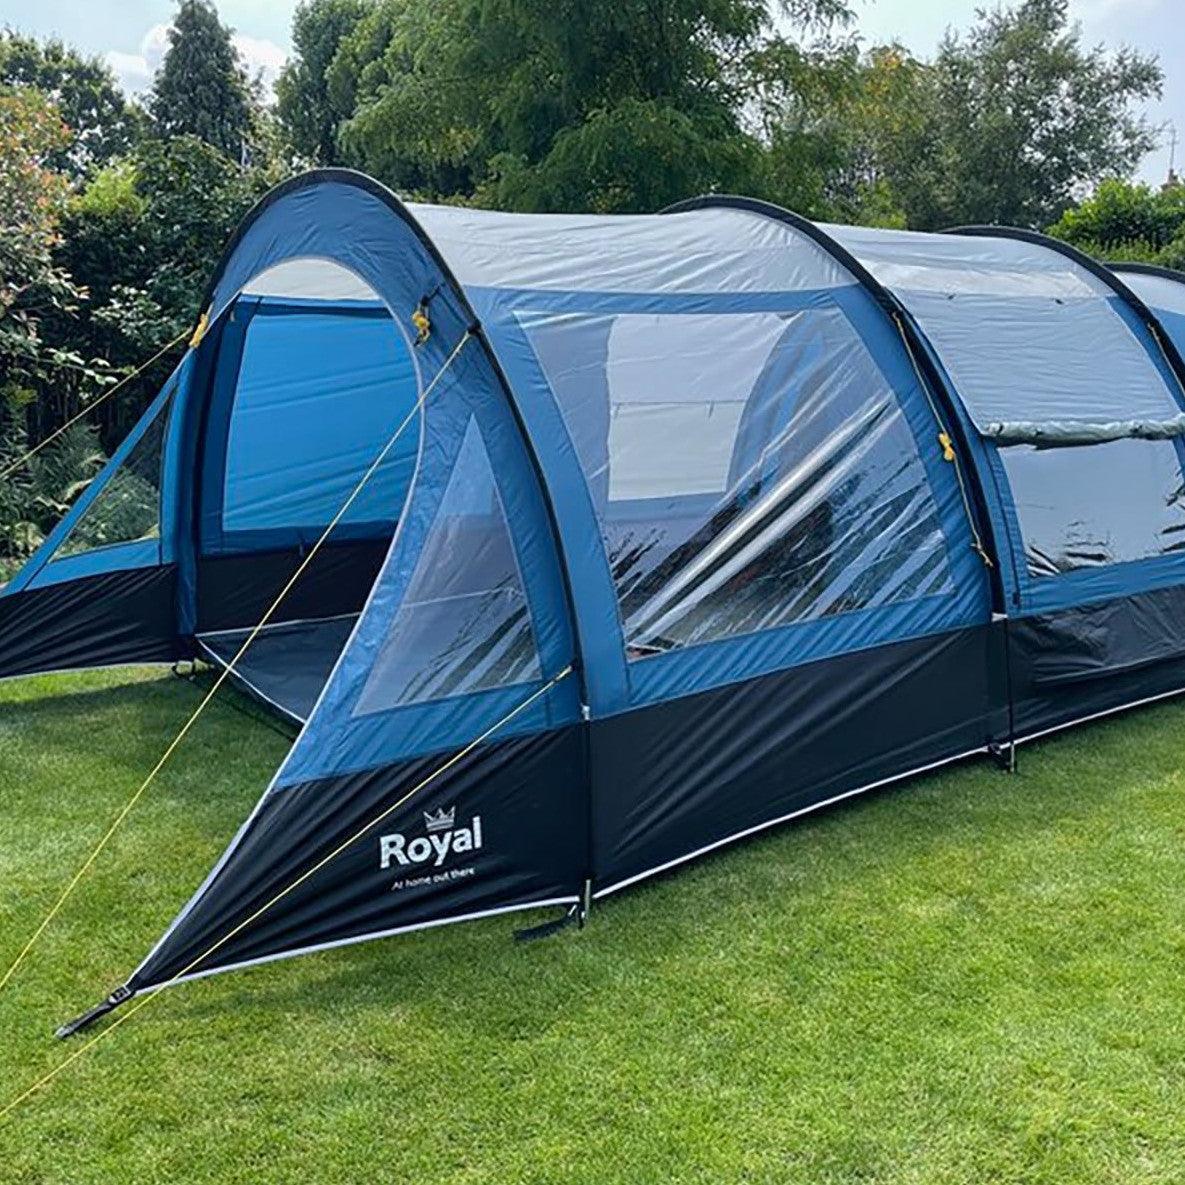 Tents 3-4 Man - UK Camping And Leisure